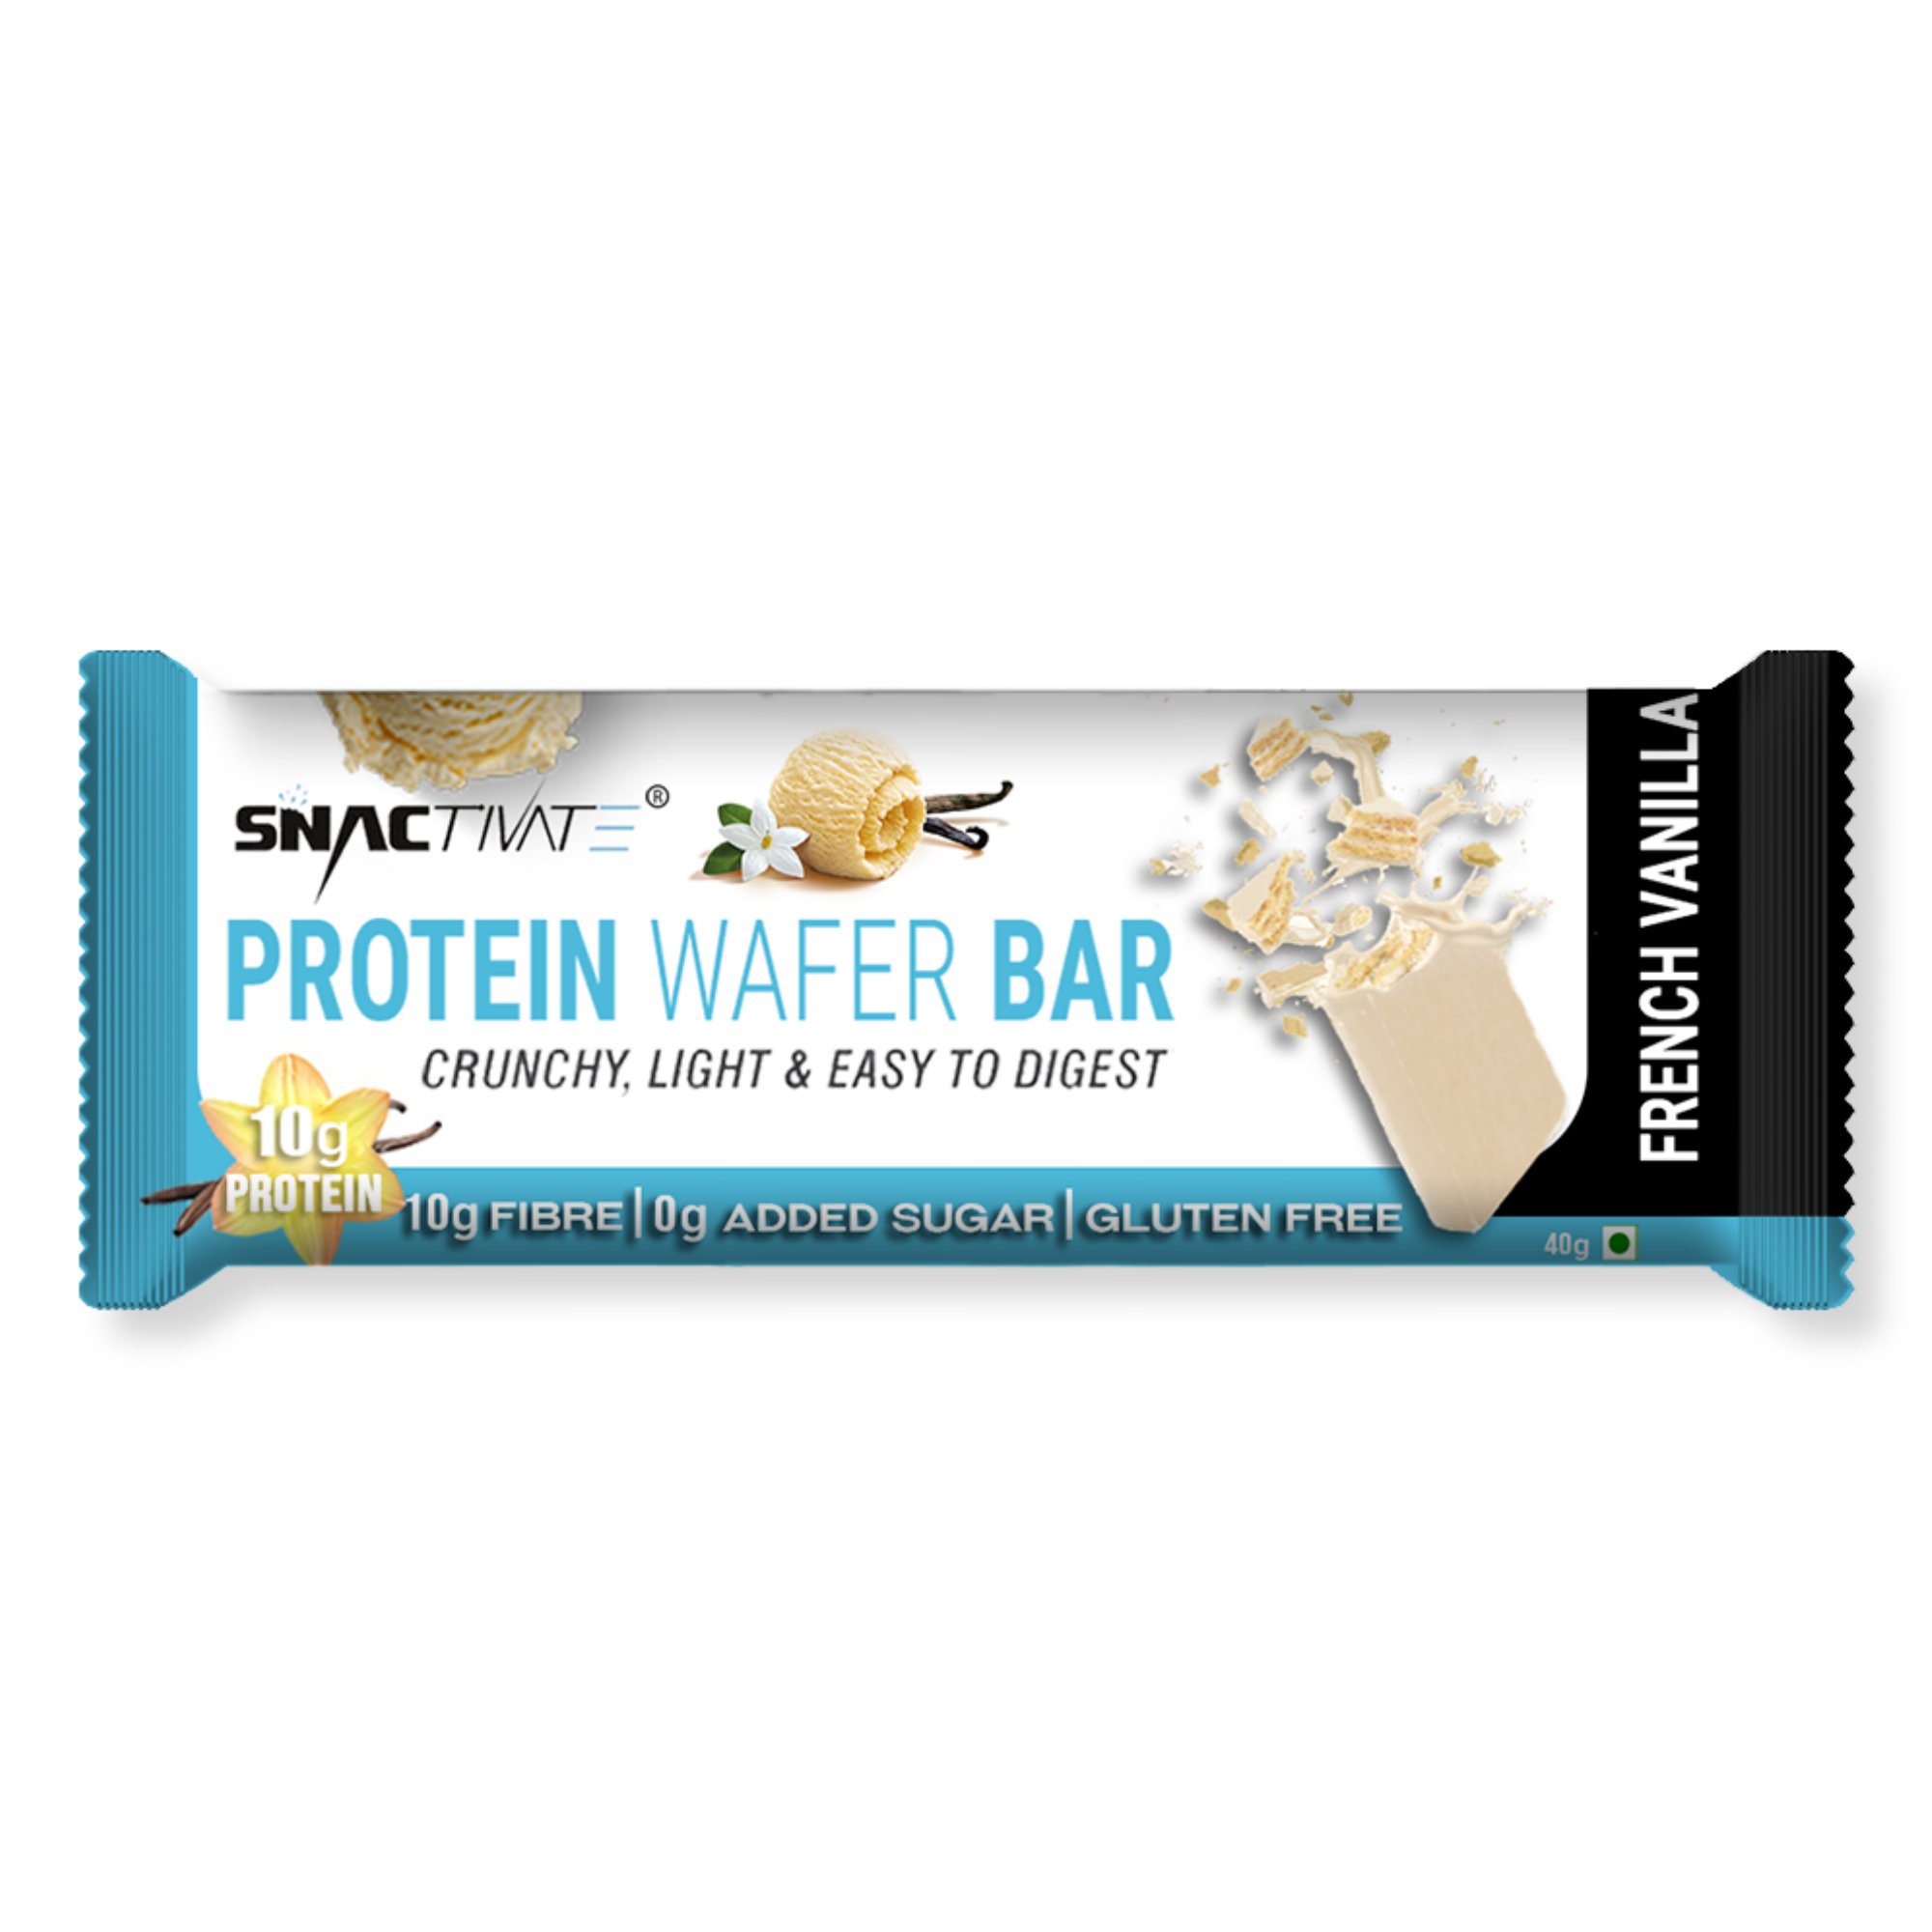 Snactivate Protein Wafer Bars - French Vanilla [Pack of 6] | 10g Protein, 10g Fiber, No Added Sugar, Gluten Free,No Soy Protein, No Maltitol | Delicious wafer based protein bar | 6 x 40g